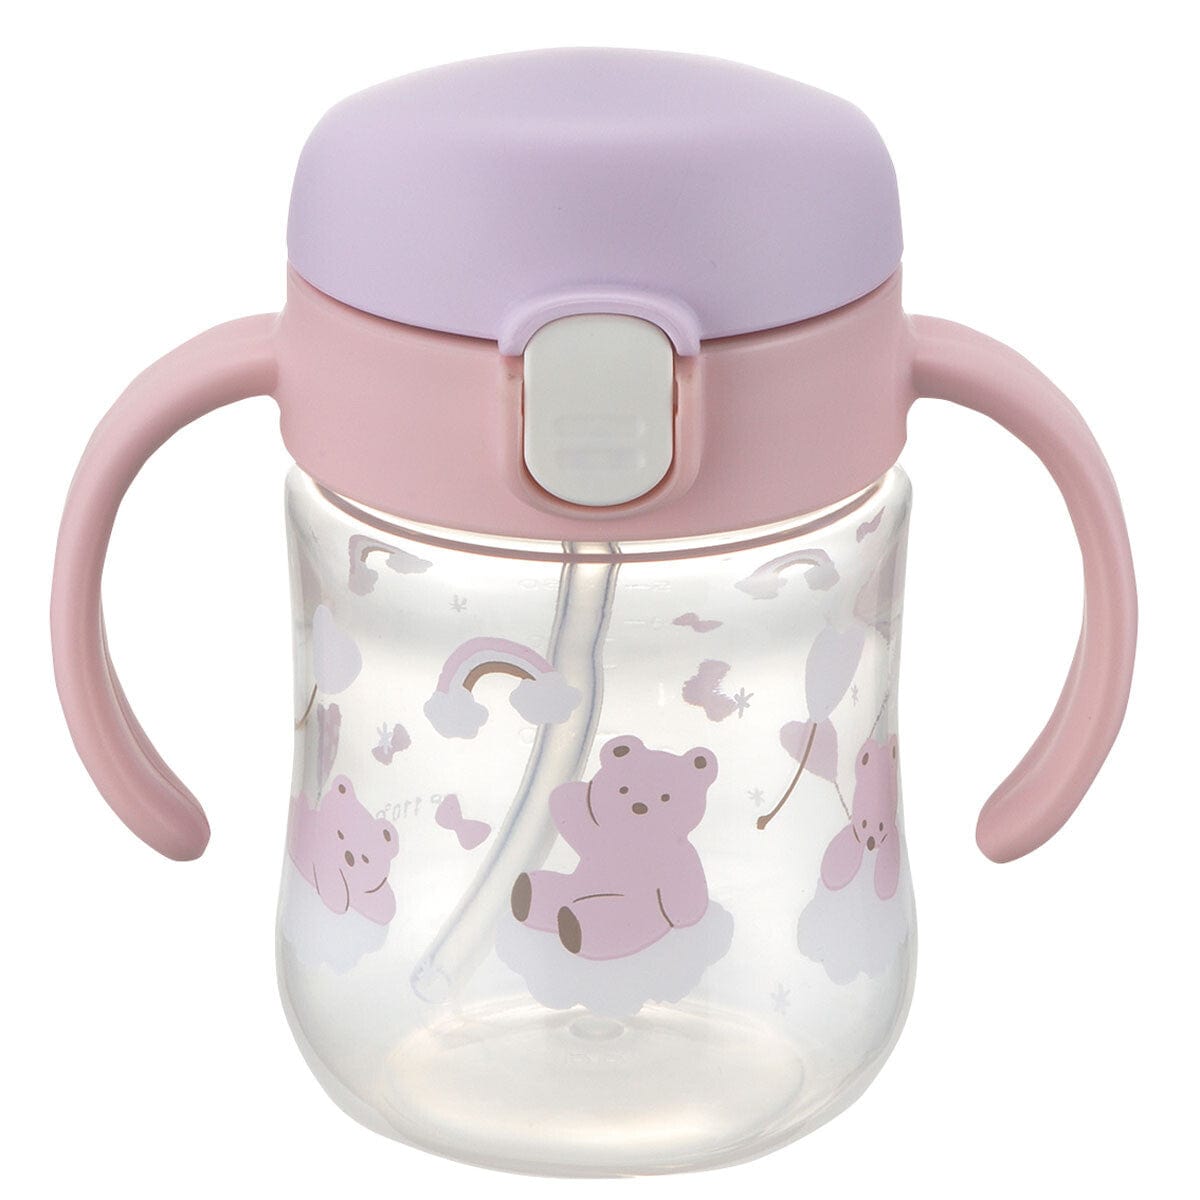 Richell - T.L.I Baby Stage 1 Try Sippy Spout Clear Training Water Bottle Mug - Pink Baby Water Bottle 4945680203517 Durio.sg